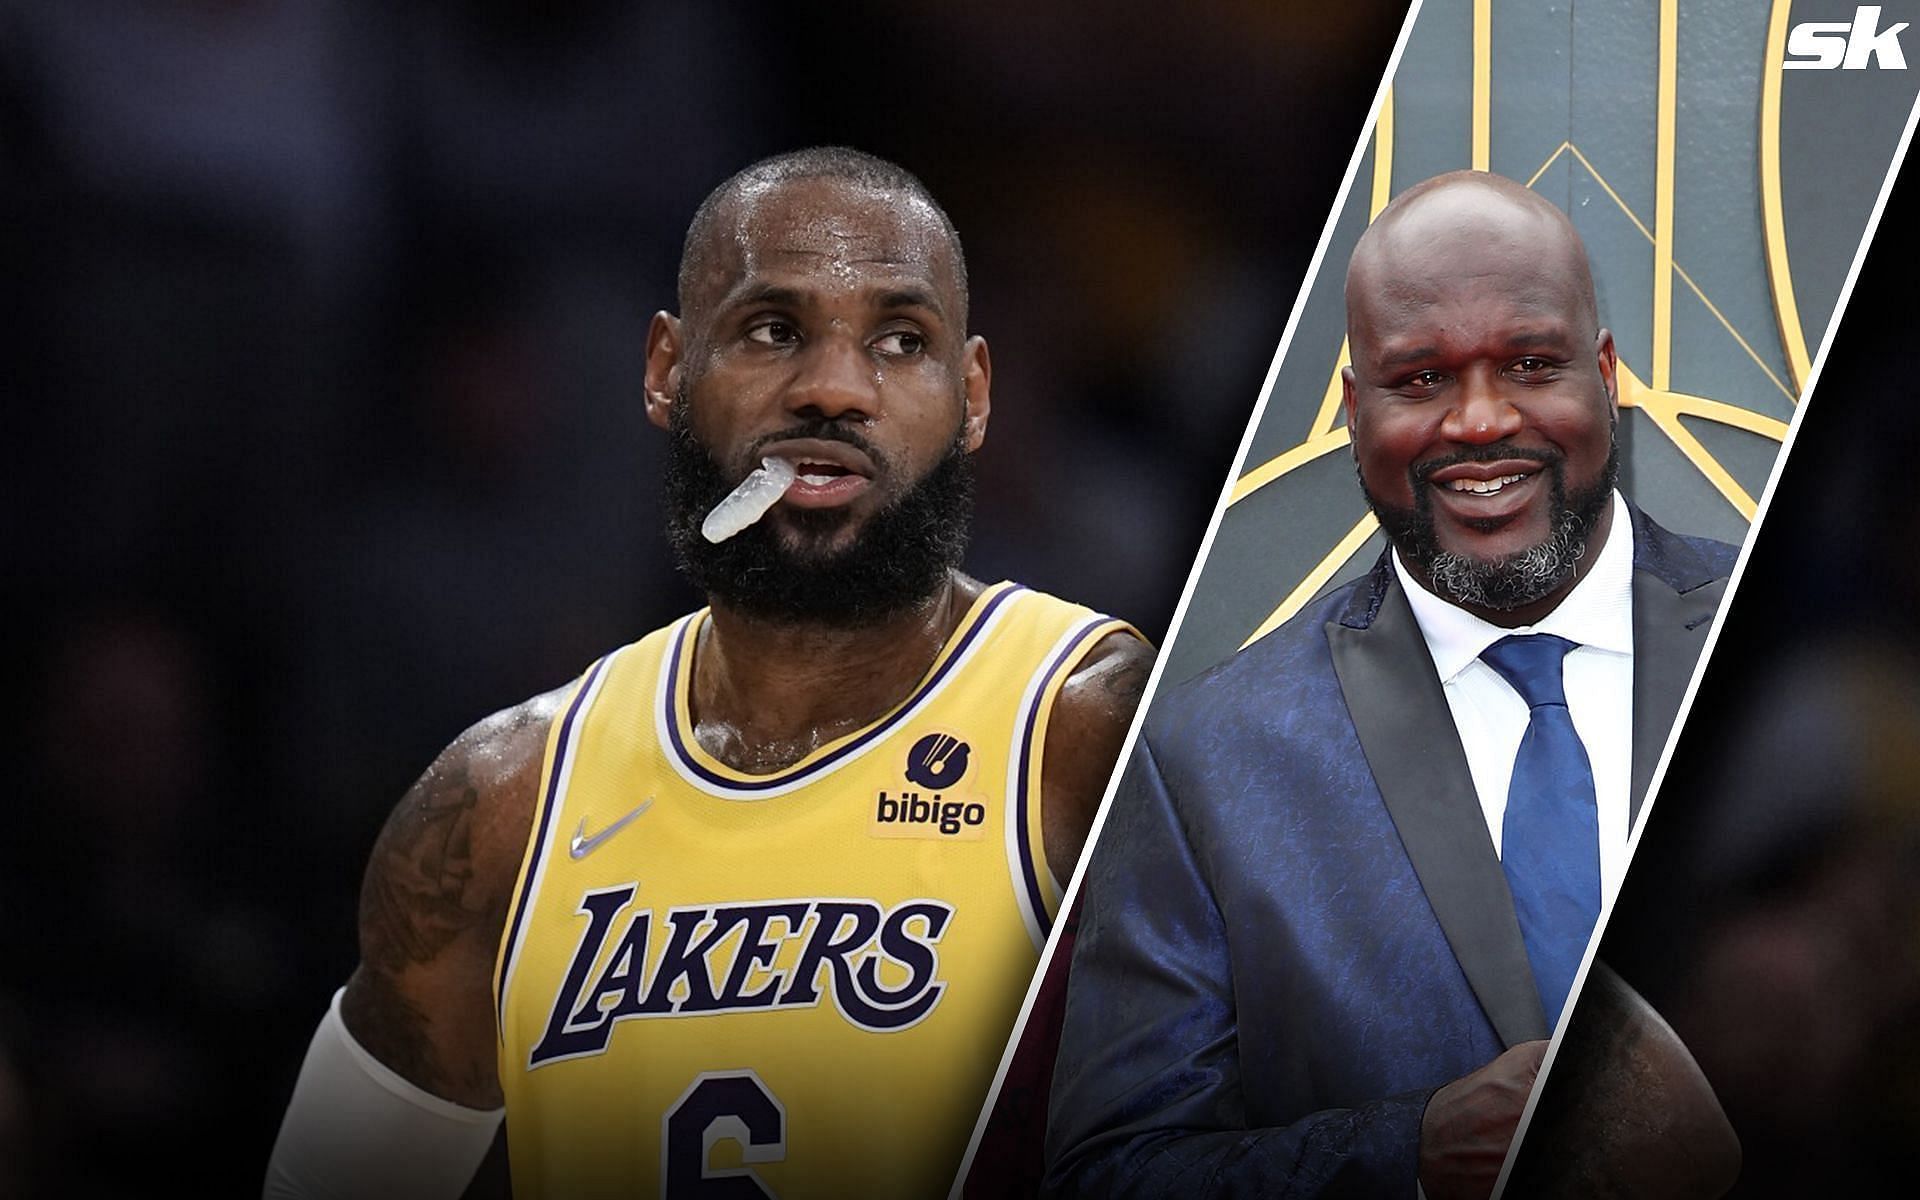 LeBron James and Shaquille O